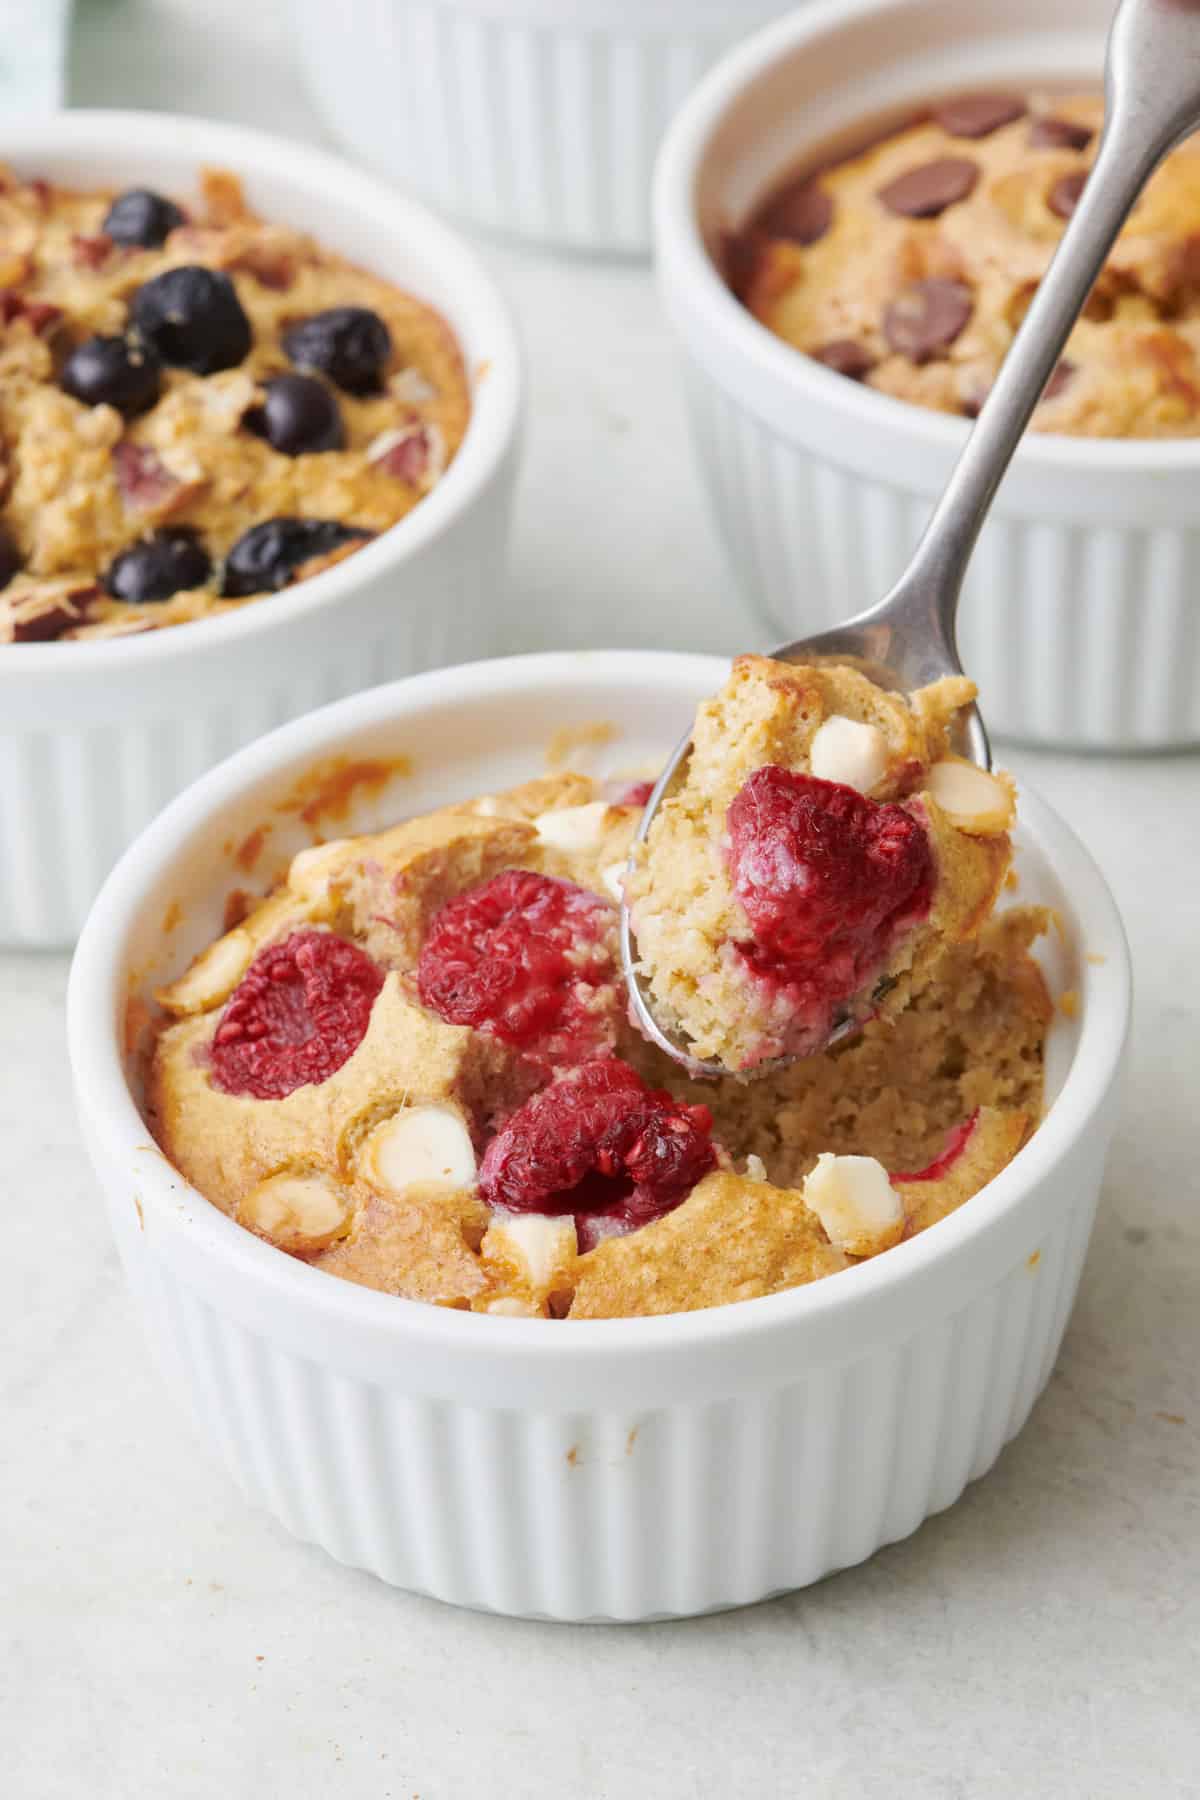 Spoon lifting up a bite of the white chocolate raspberry baked oats.